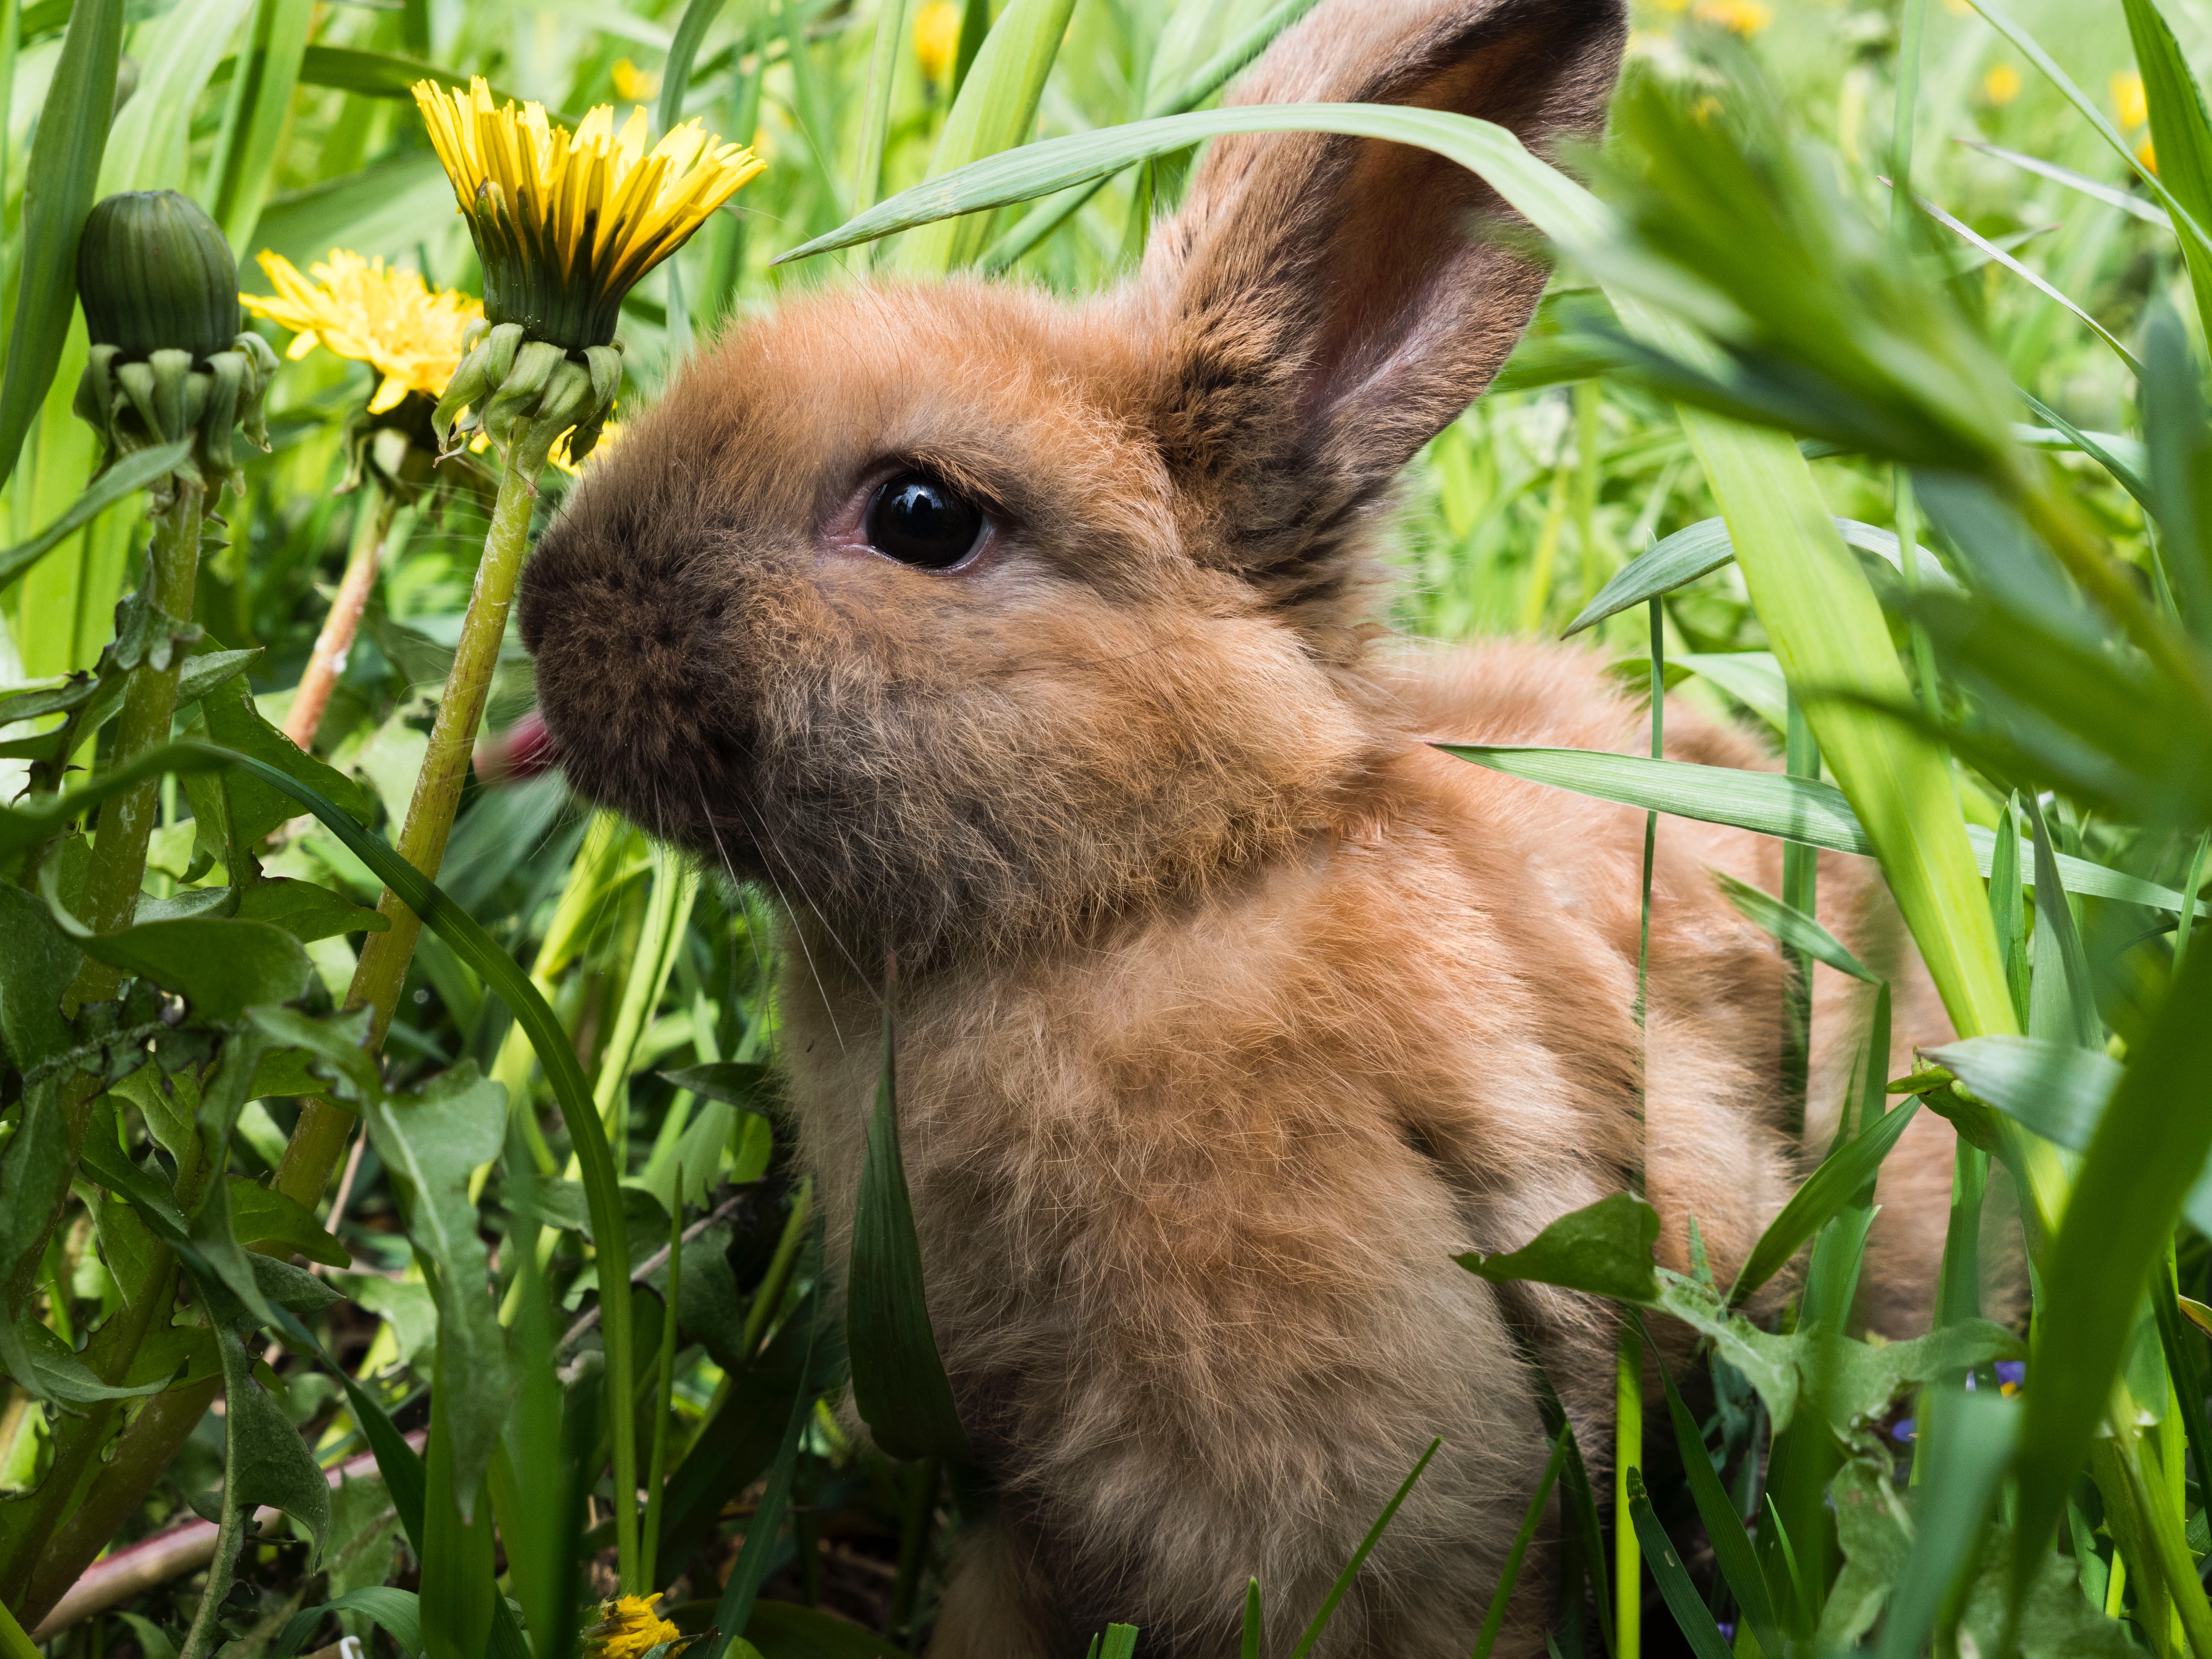 A baby rabbit in the grass